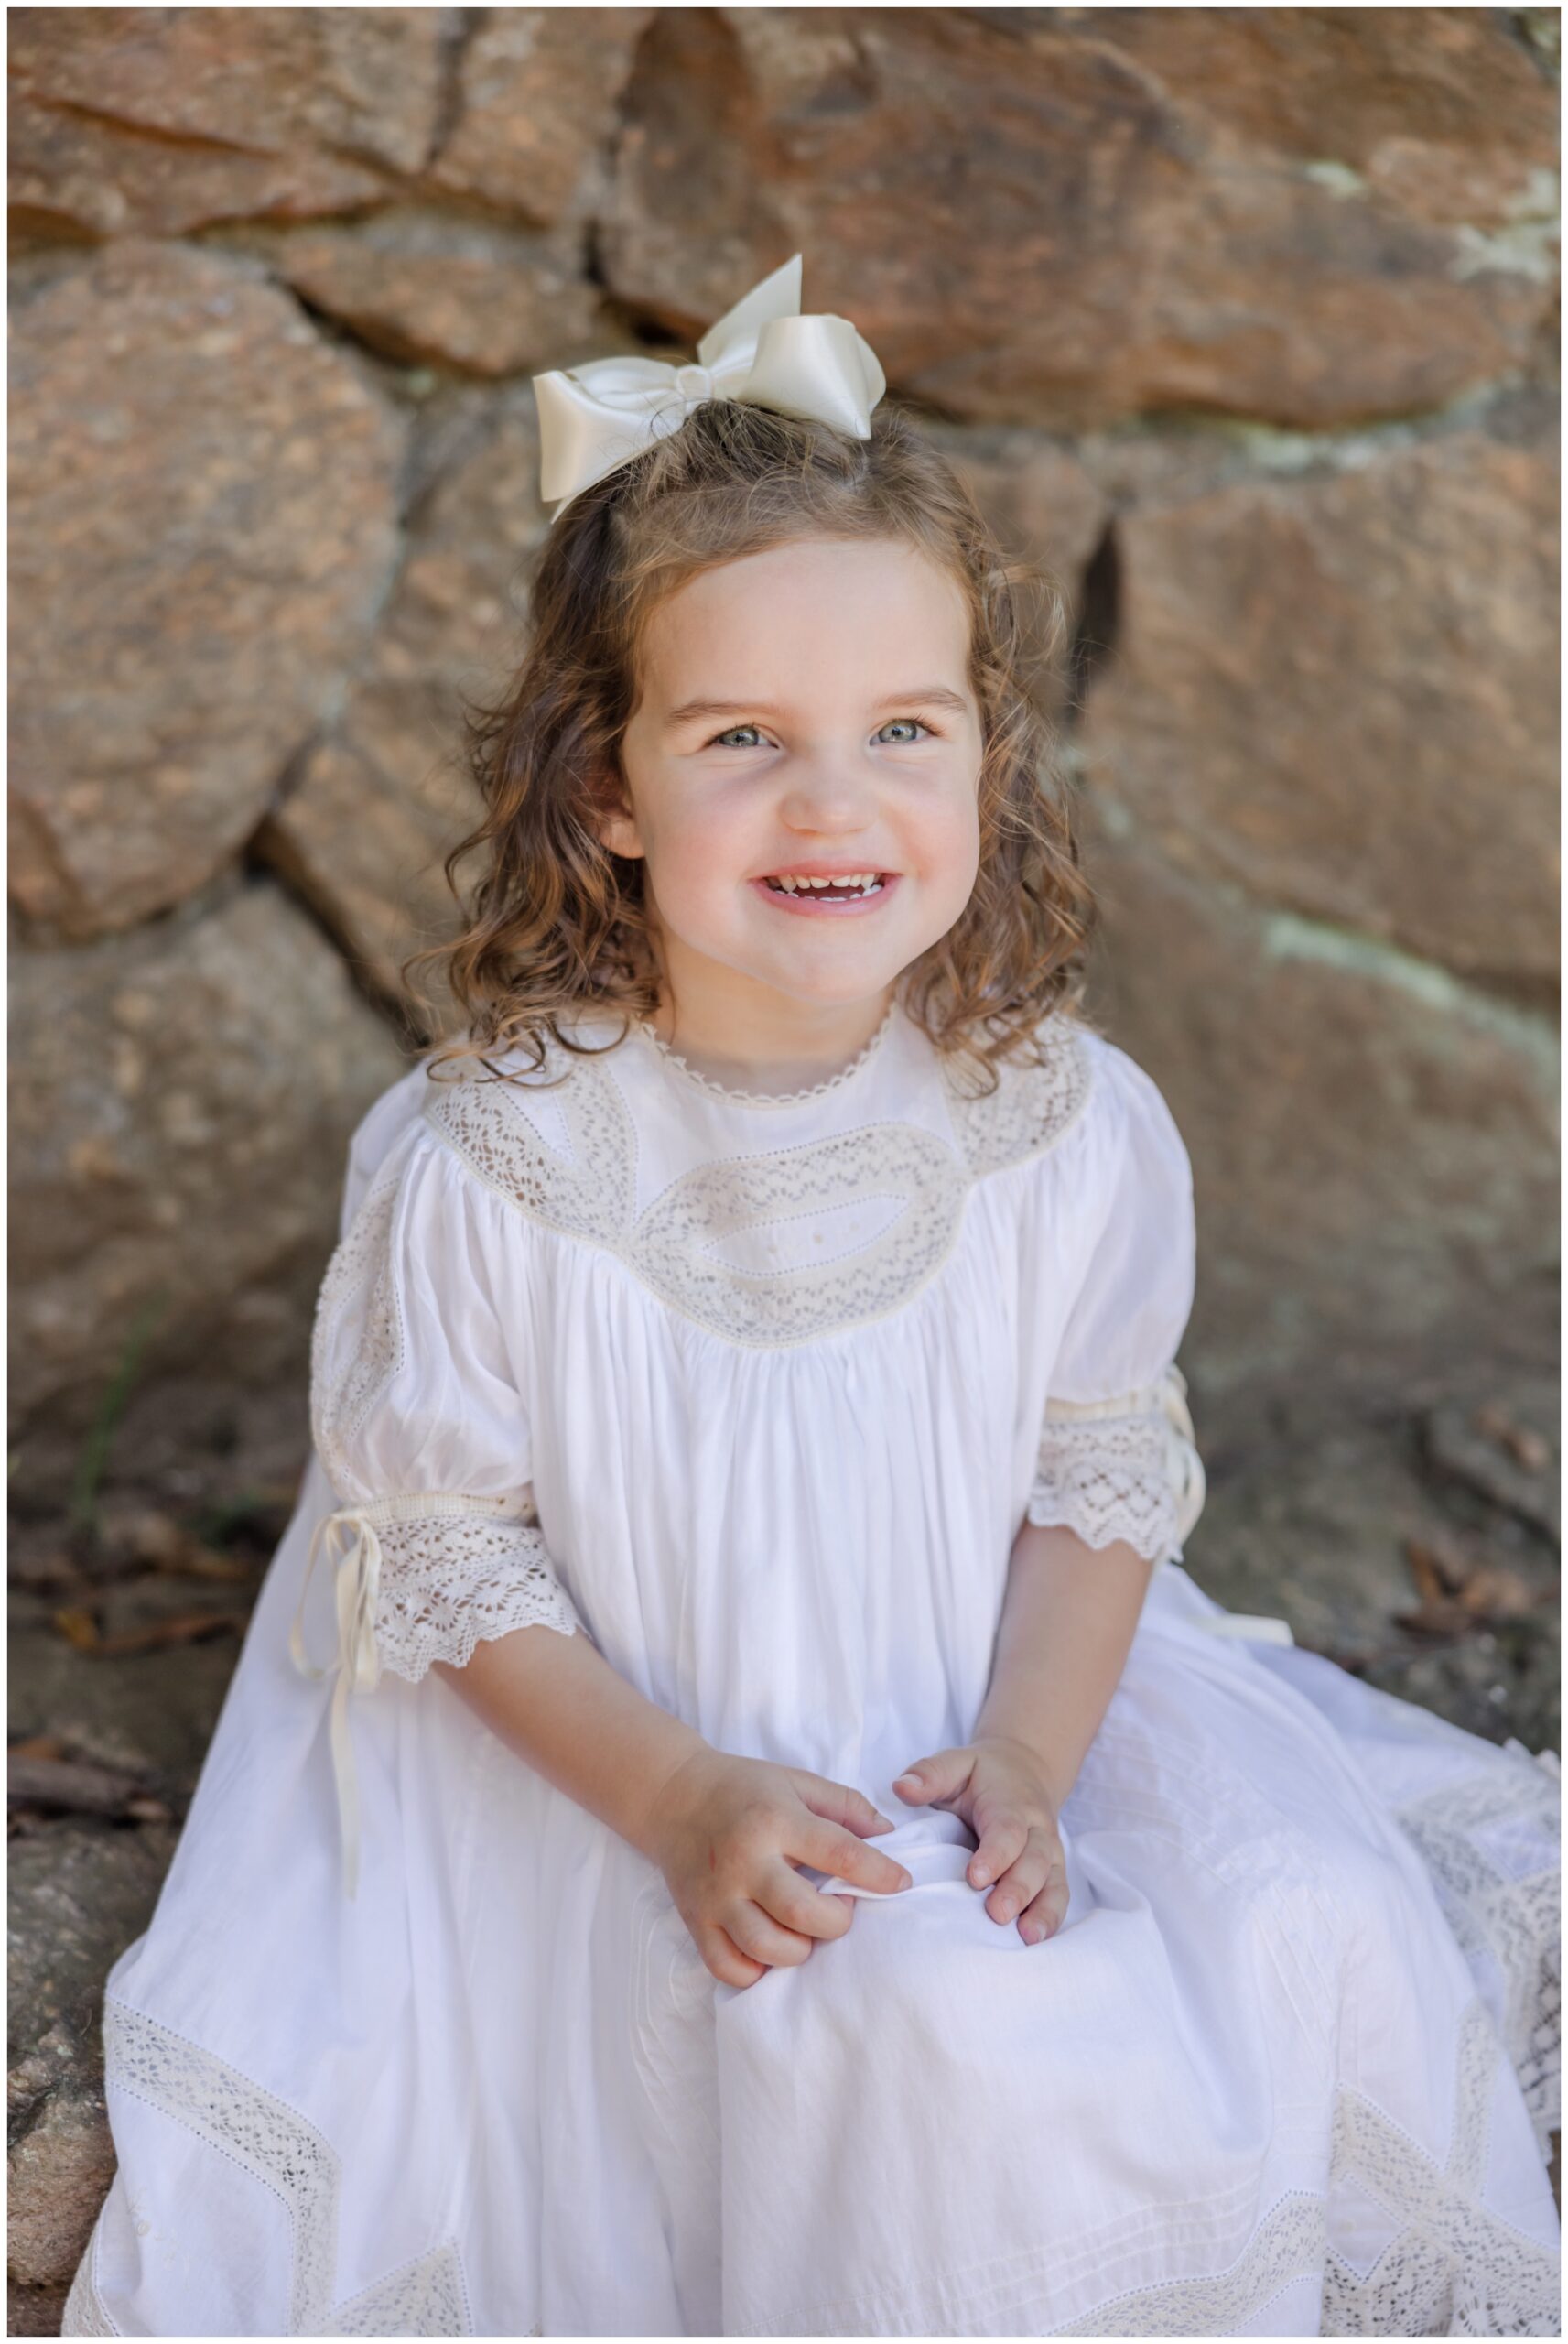 Young girl posing for Greenville children's portraits in a white dress with lace detailing in front of a rock wall backdrop.